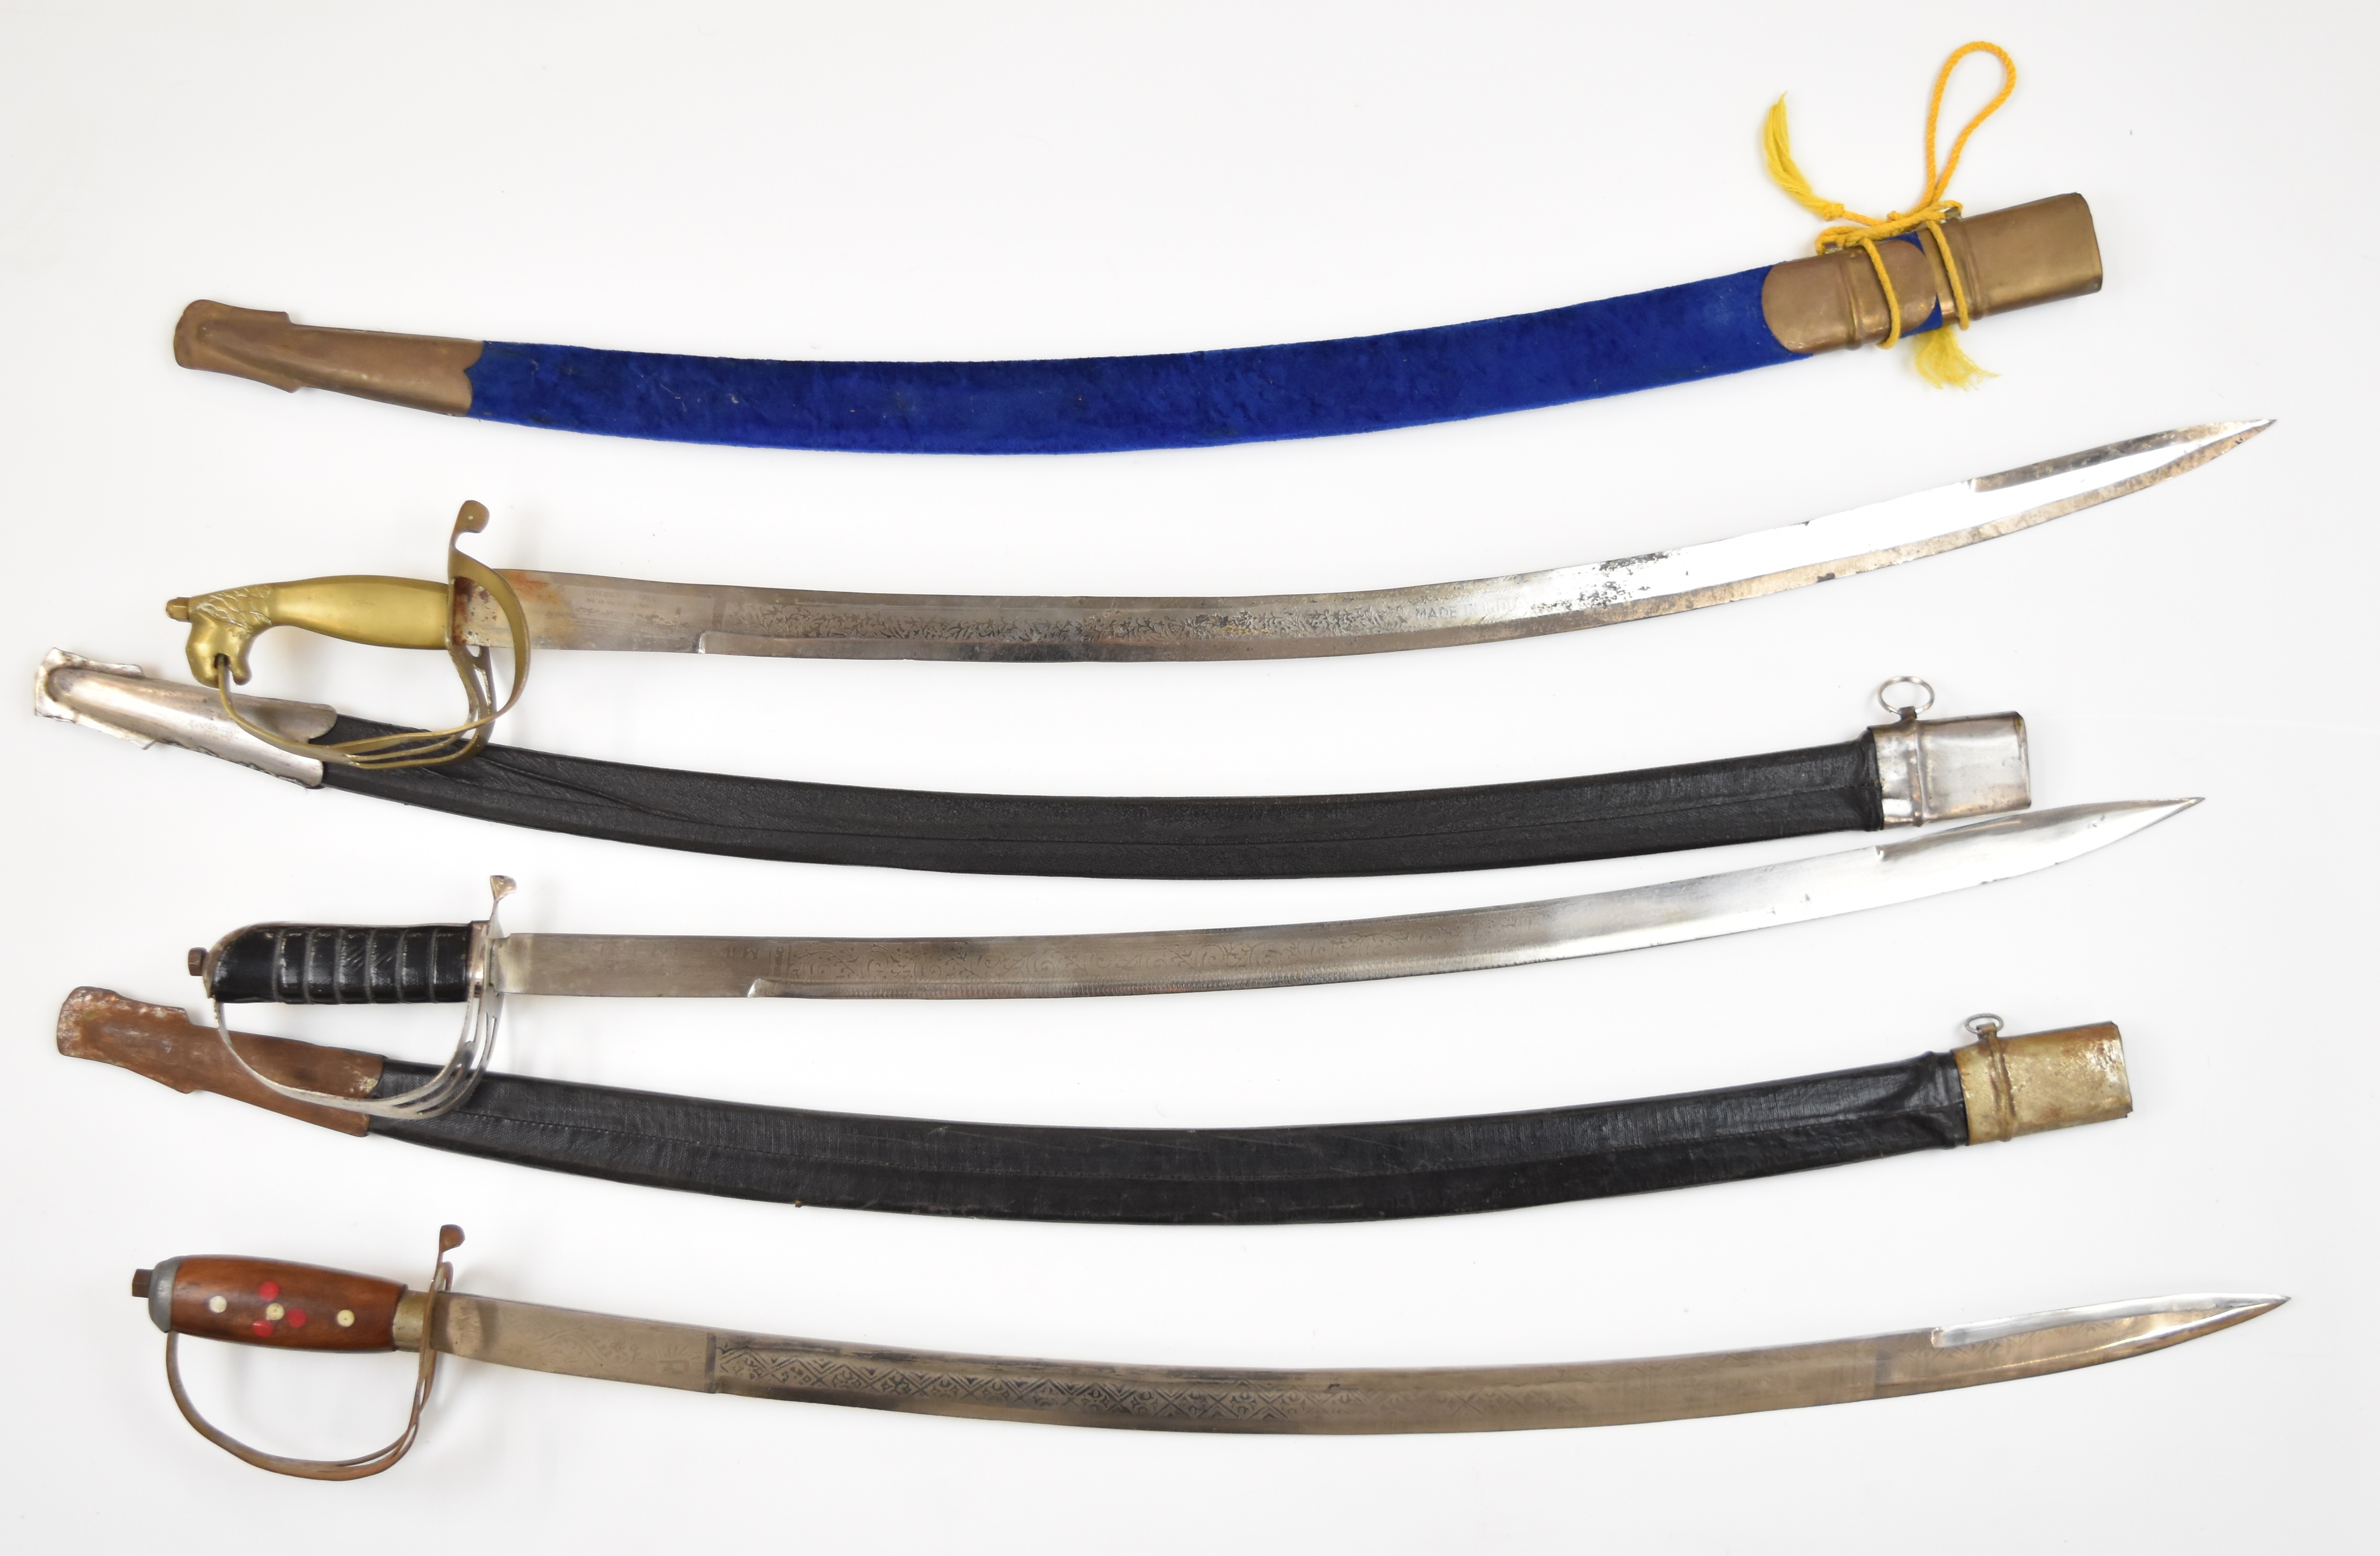 Three made in India tourist swords, longest blade 72cm. PLEASE NOTE ALL BLADED ITEMS ARE SUBJECT - Image 8 of 8